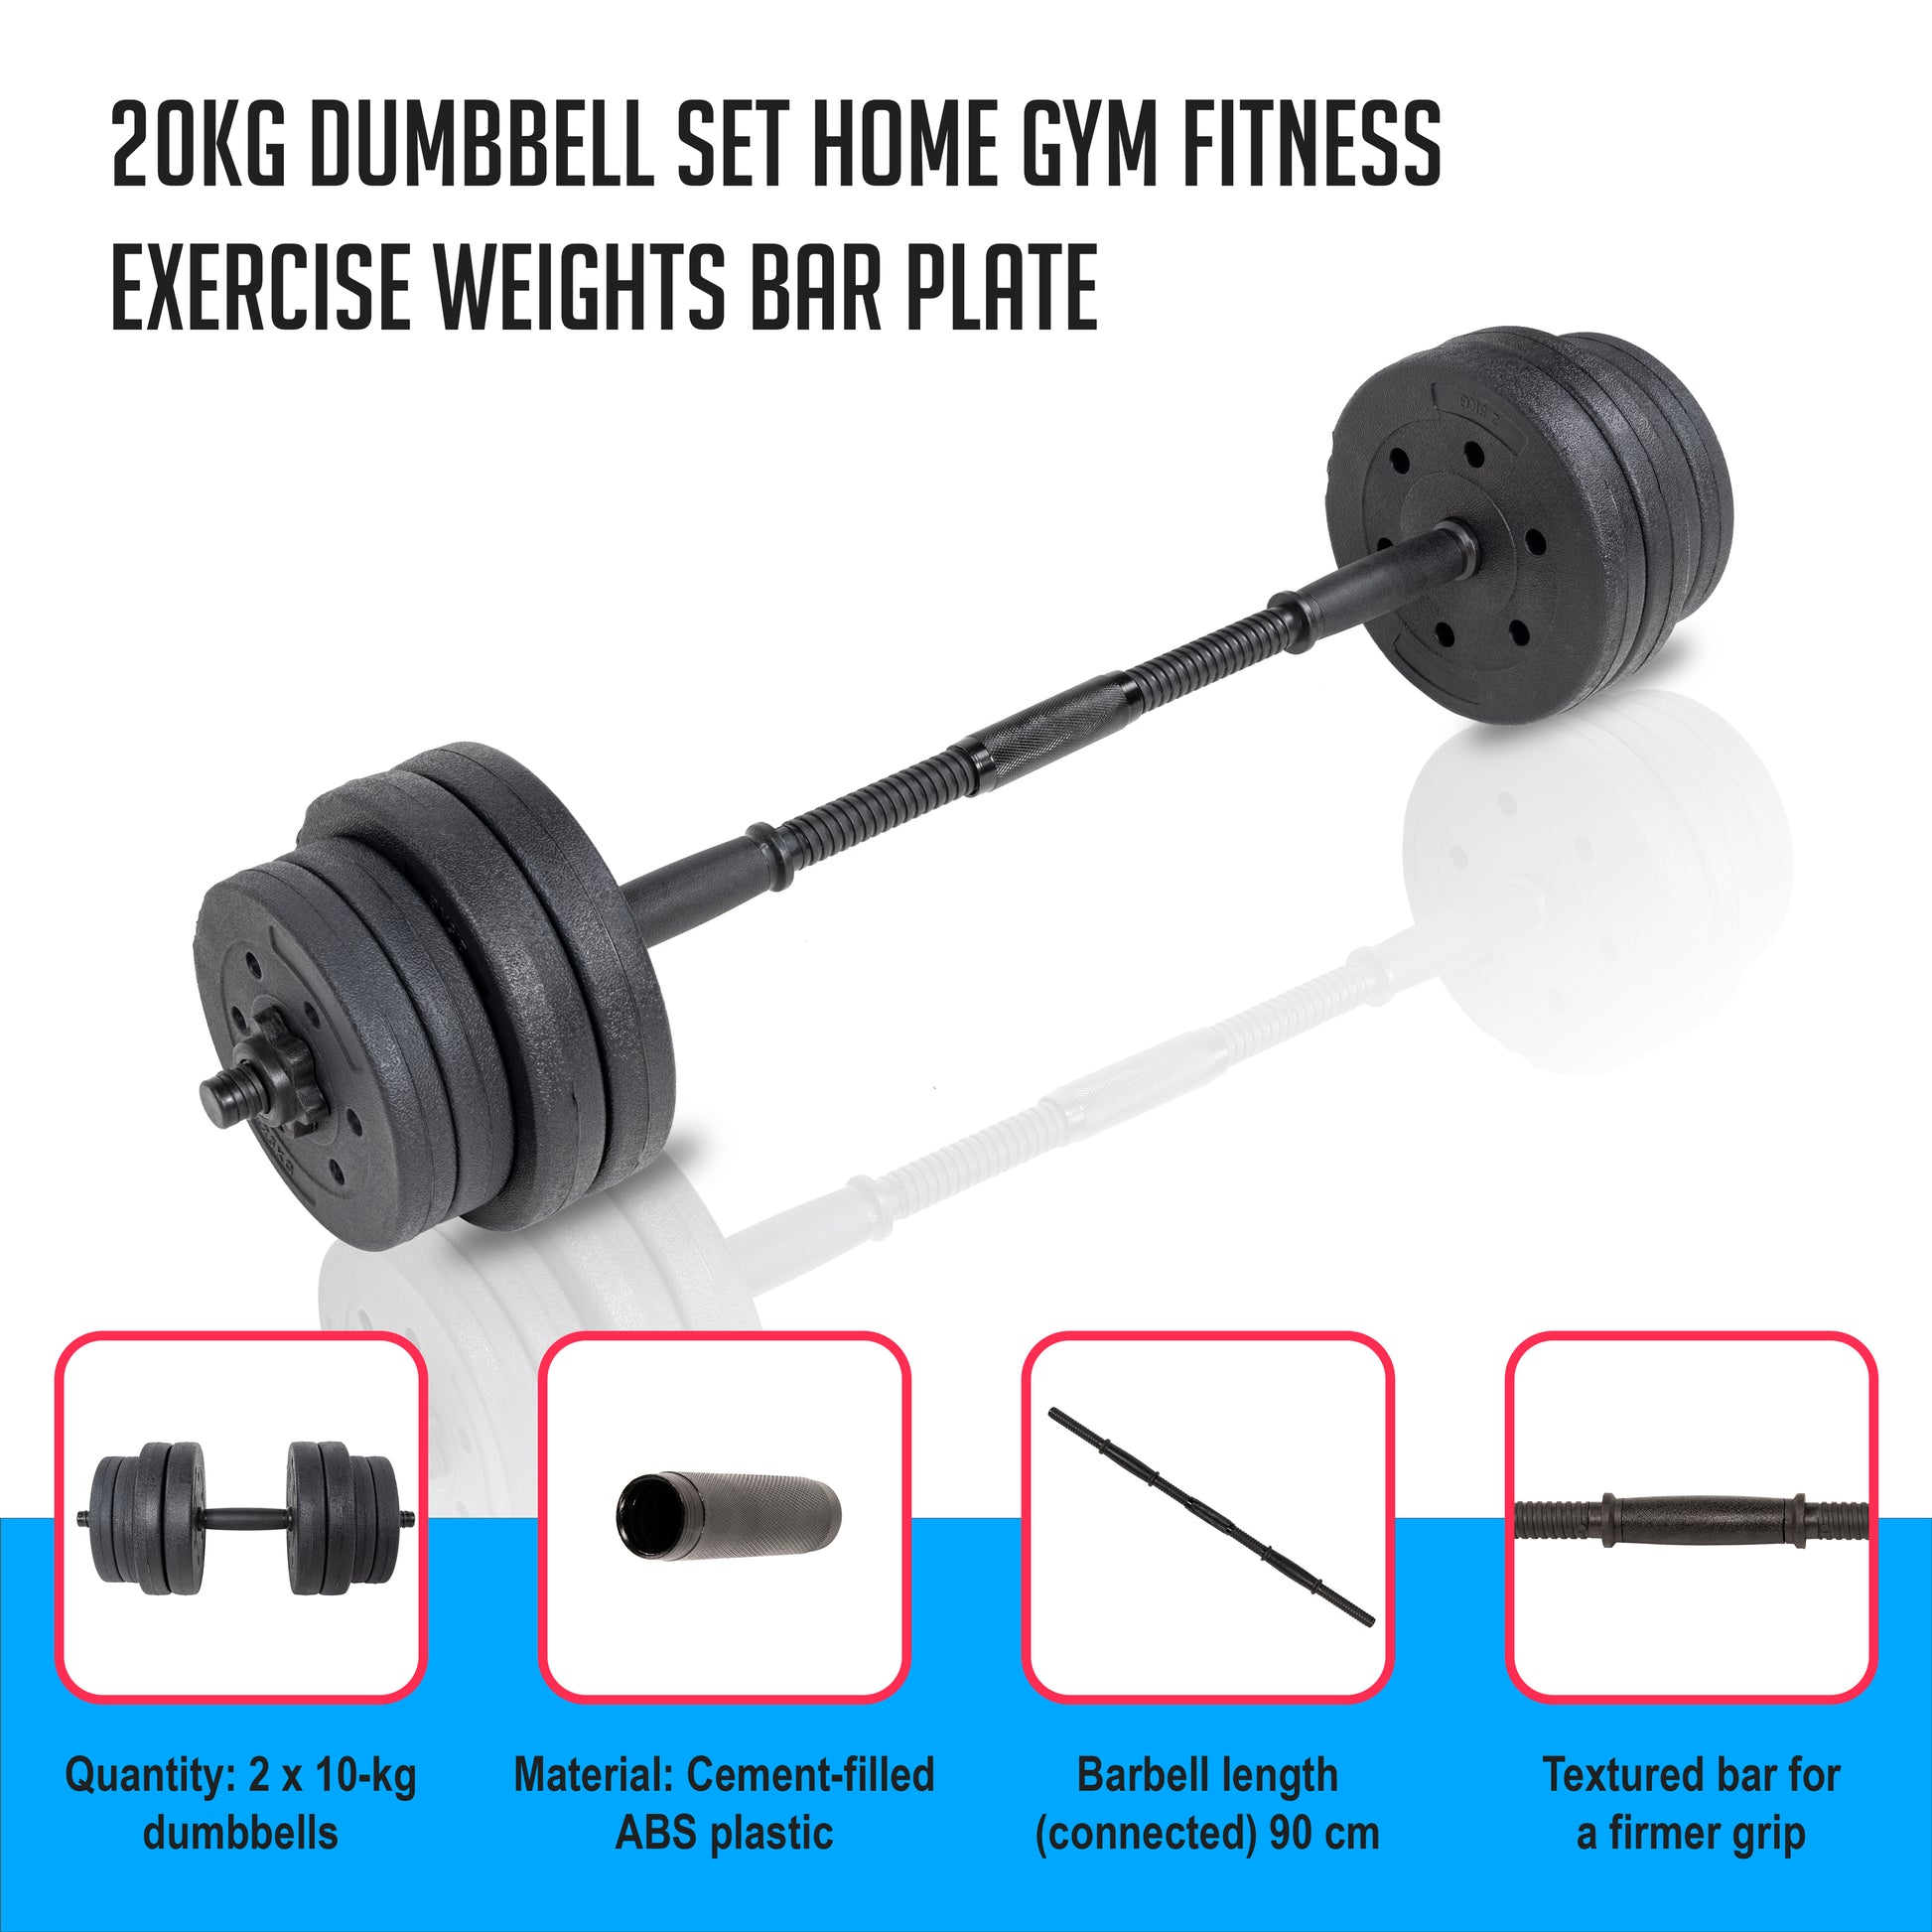 20kg Dumbbell Set Home Gym Fitness Exercise Weights Bar Plate - image3